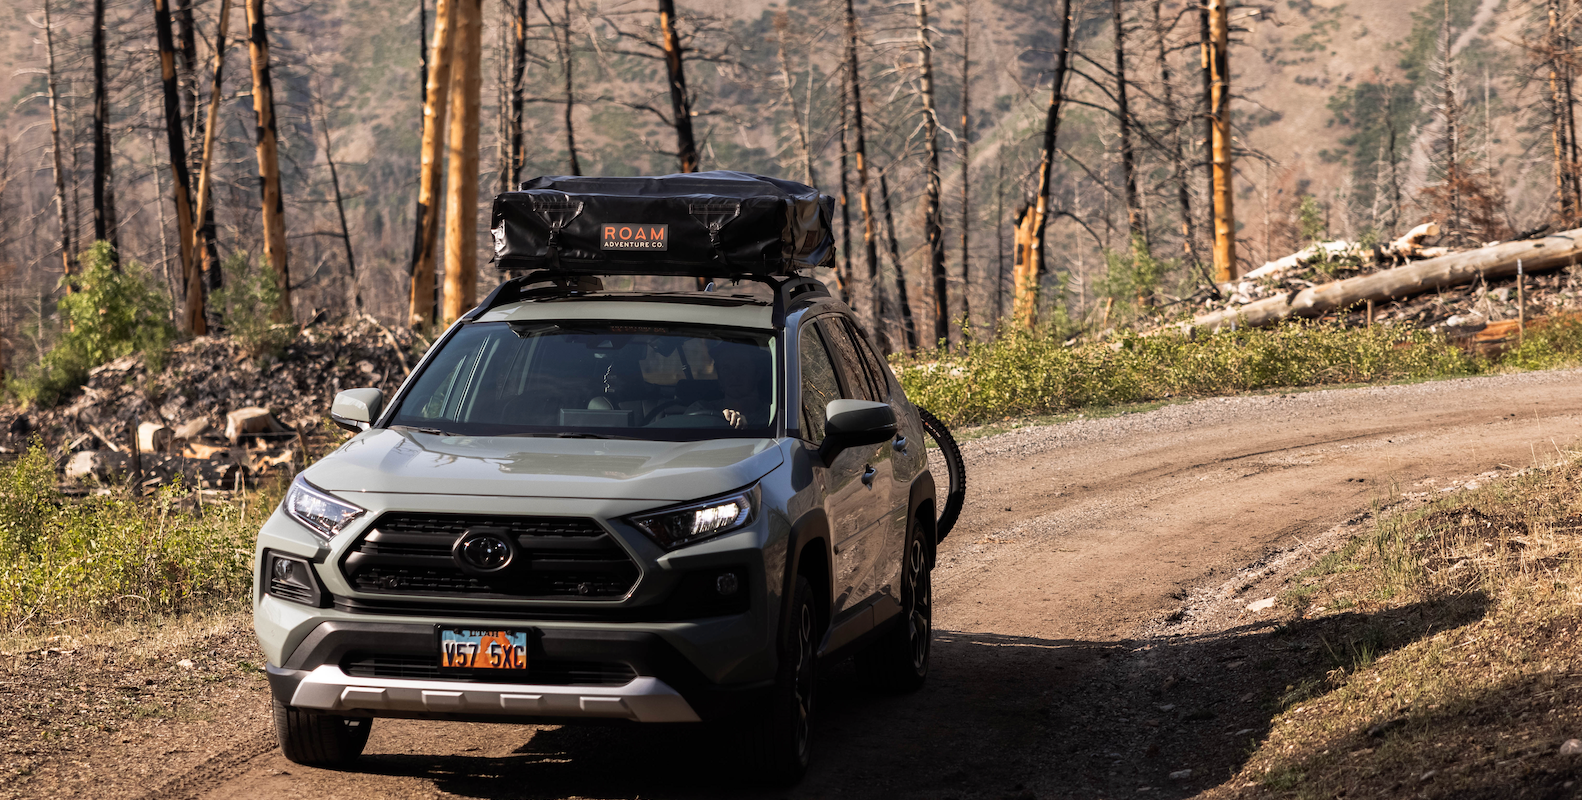 THE BEST ROOFTOP TENTS FOR A TOYOTA RAV4